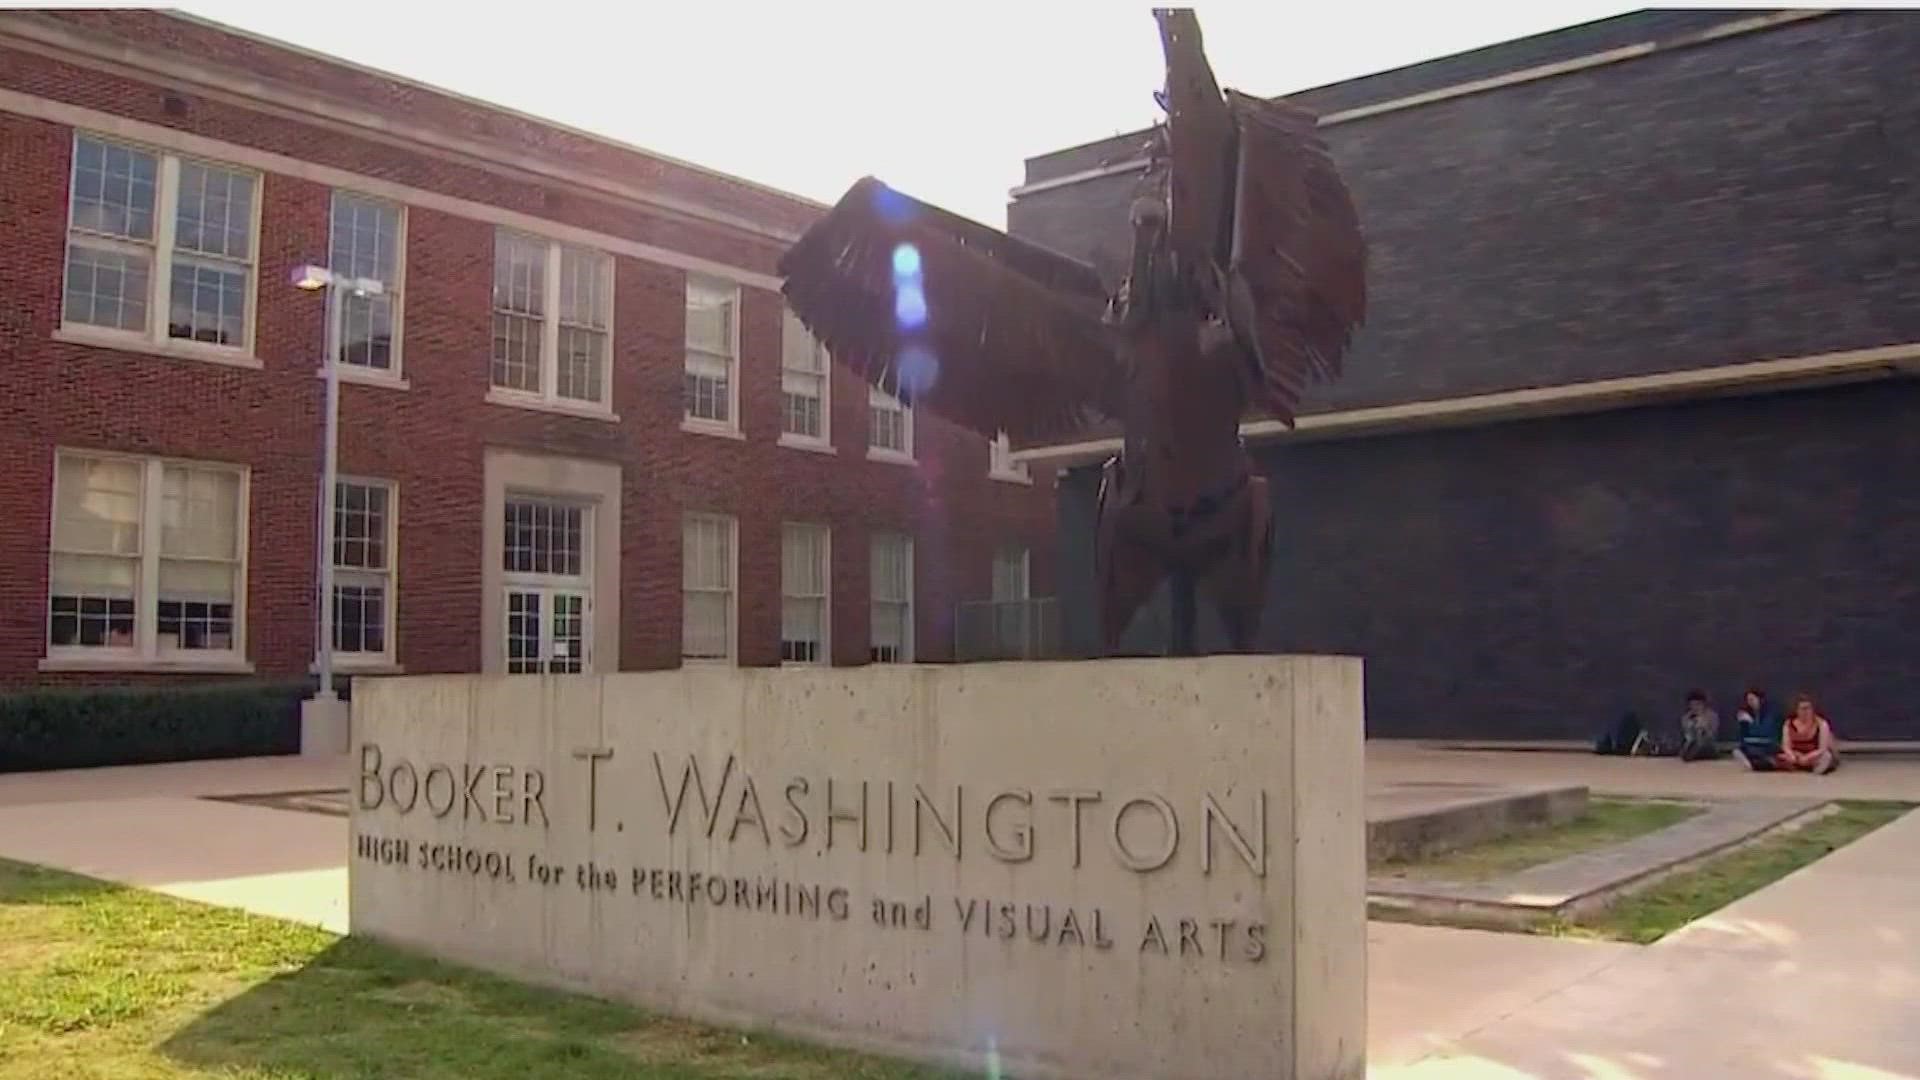 Booker T. Washington is a world-renowned school with a big celebration coming up.